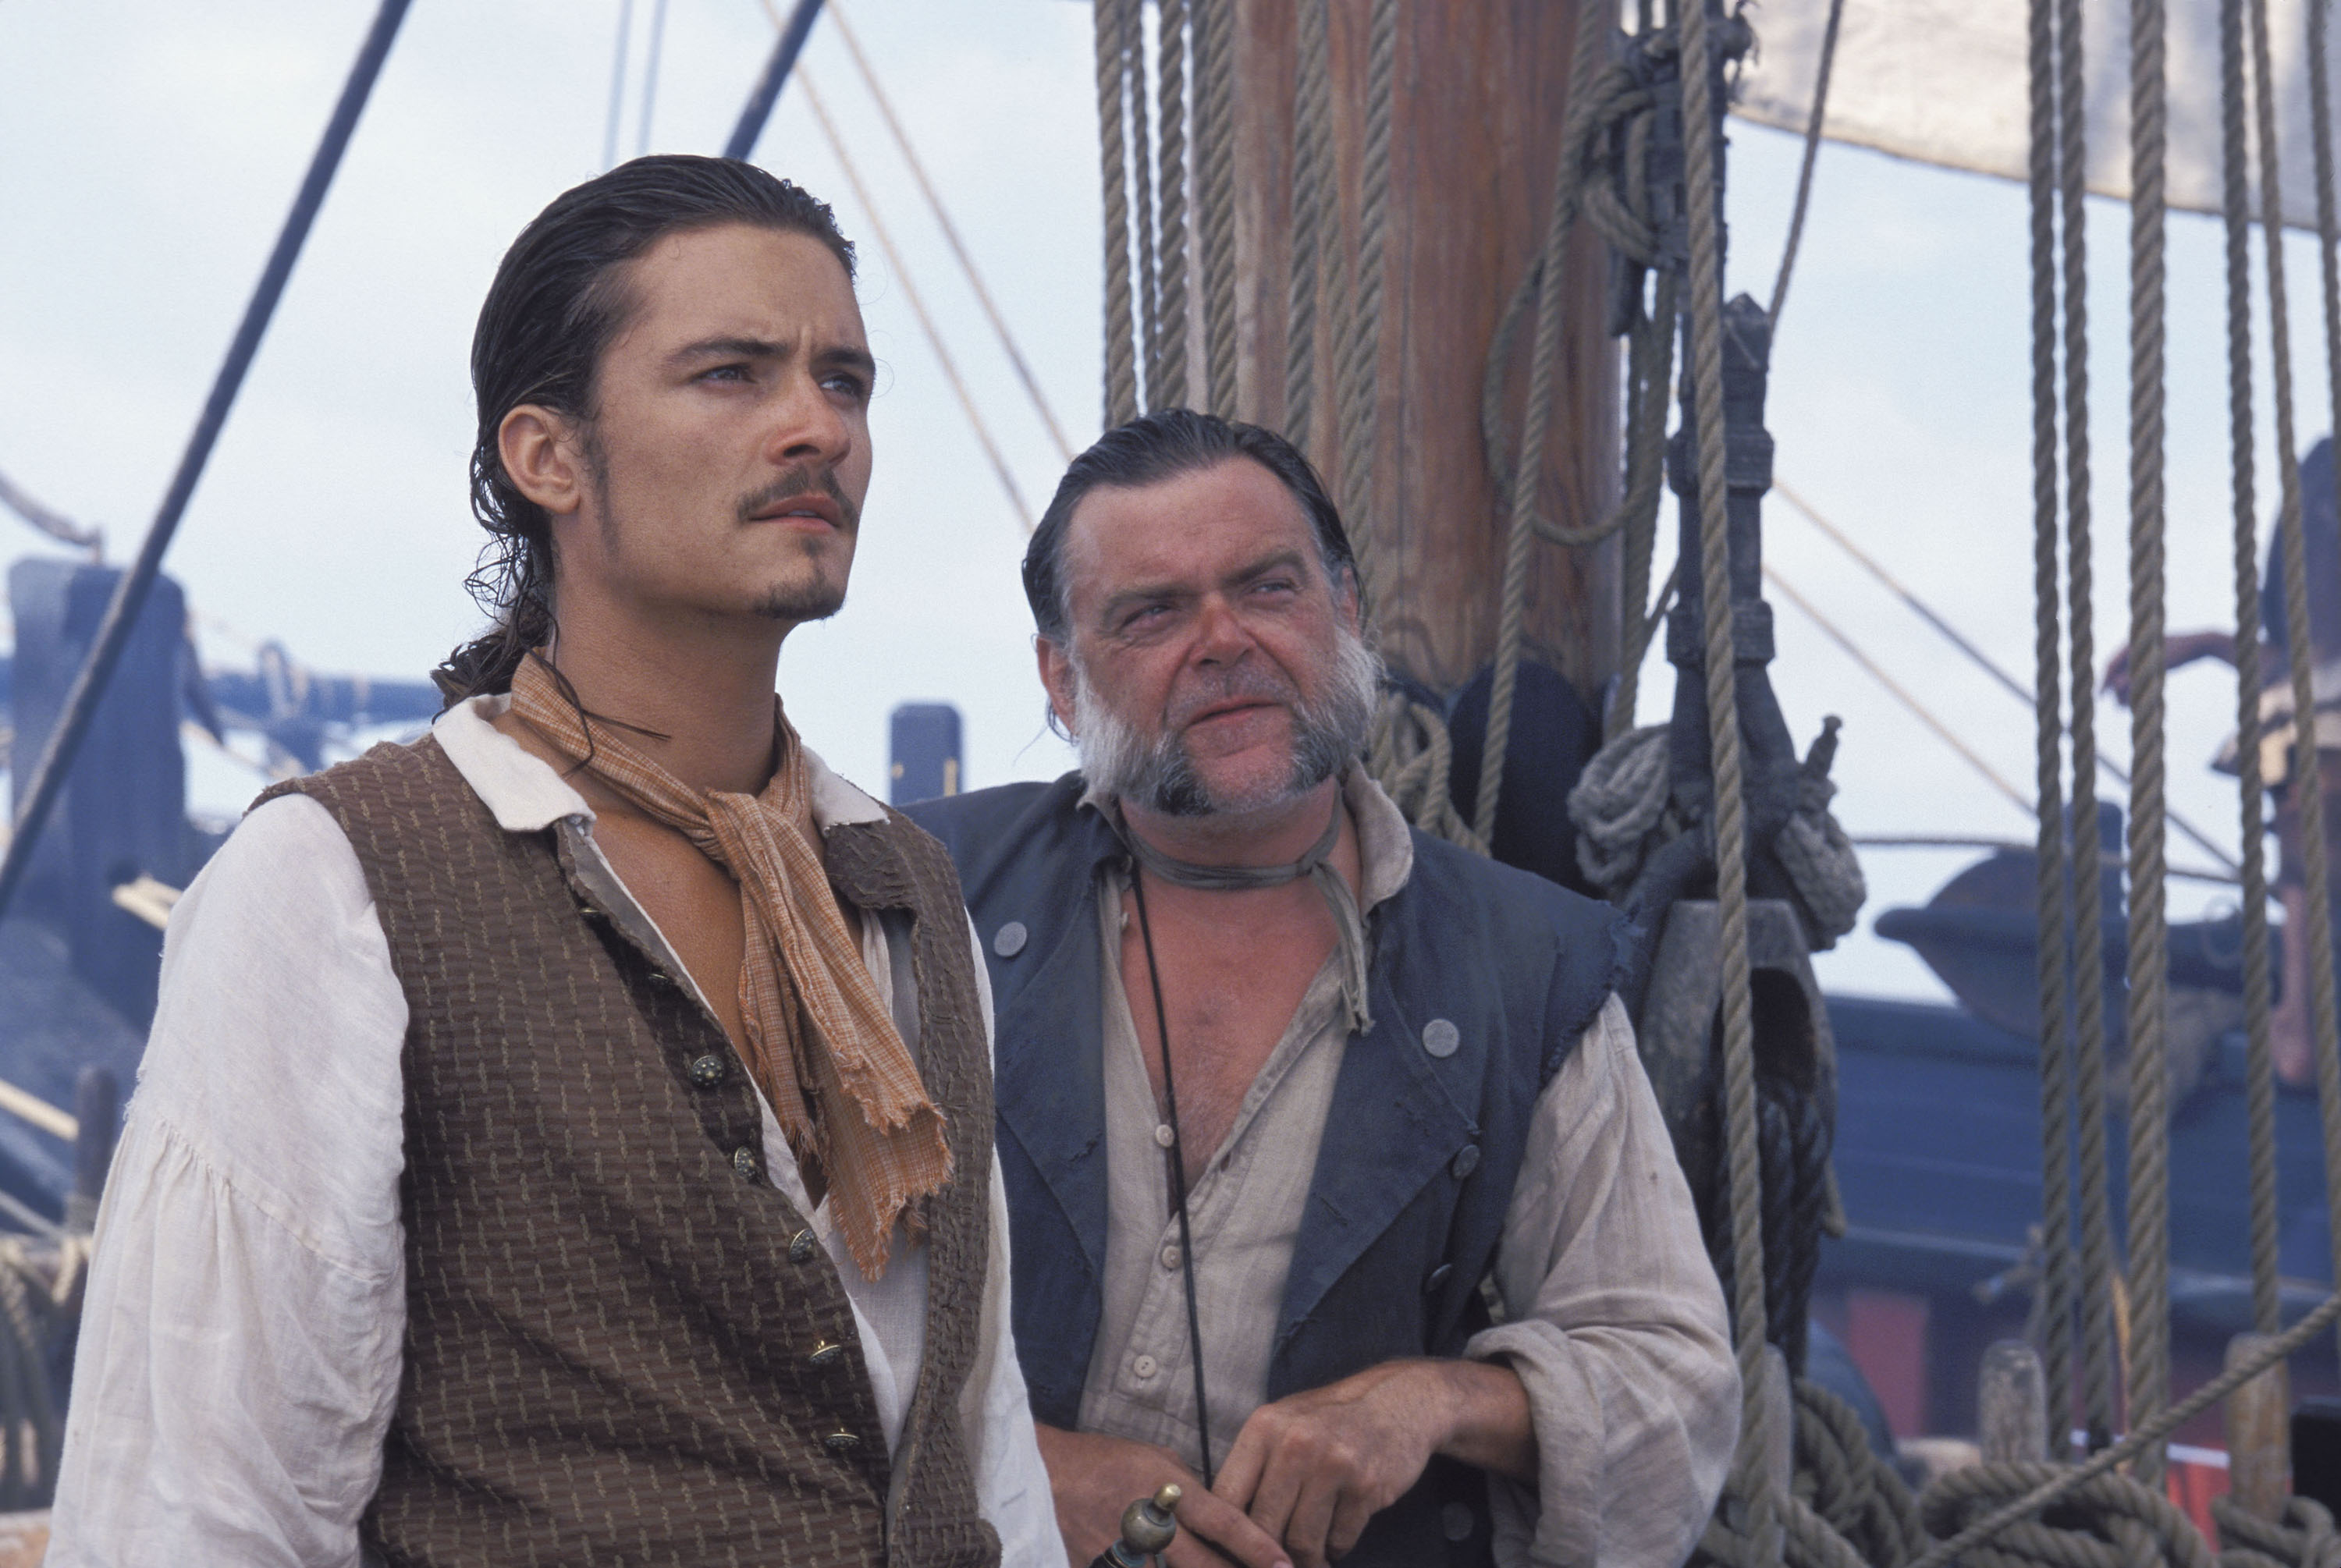 movie, pirates of the caribbean: the curse of the black pearl, joshamee gibbs, kevin mcnally, orlando bloom, will turner, pirates of the caribbean